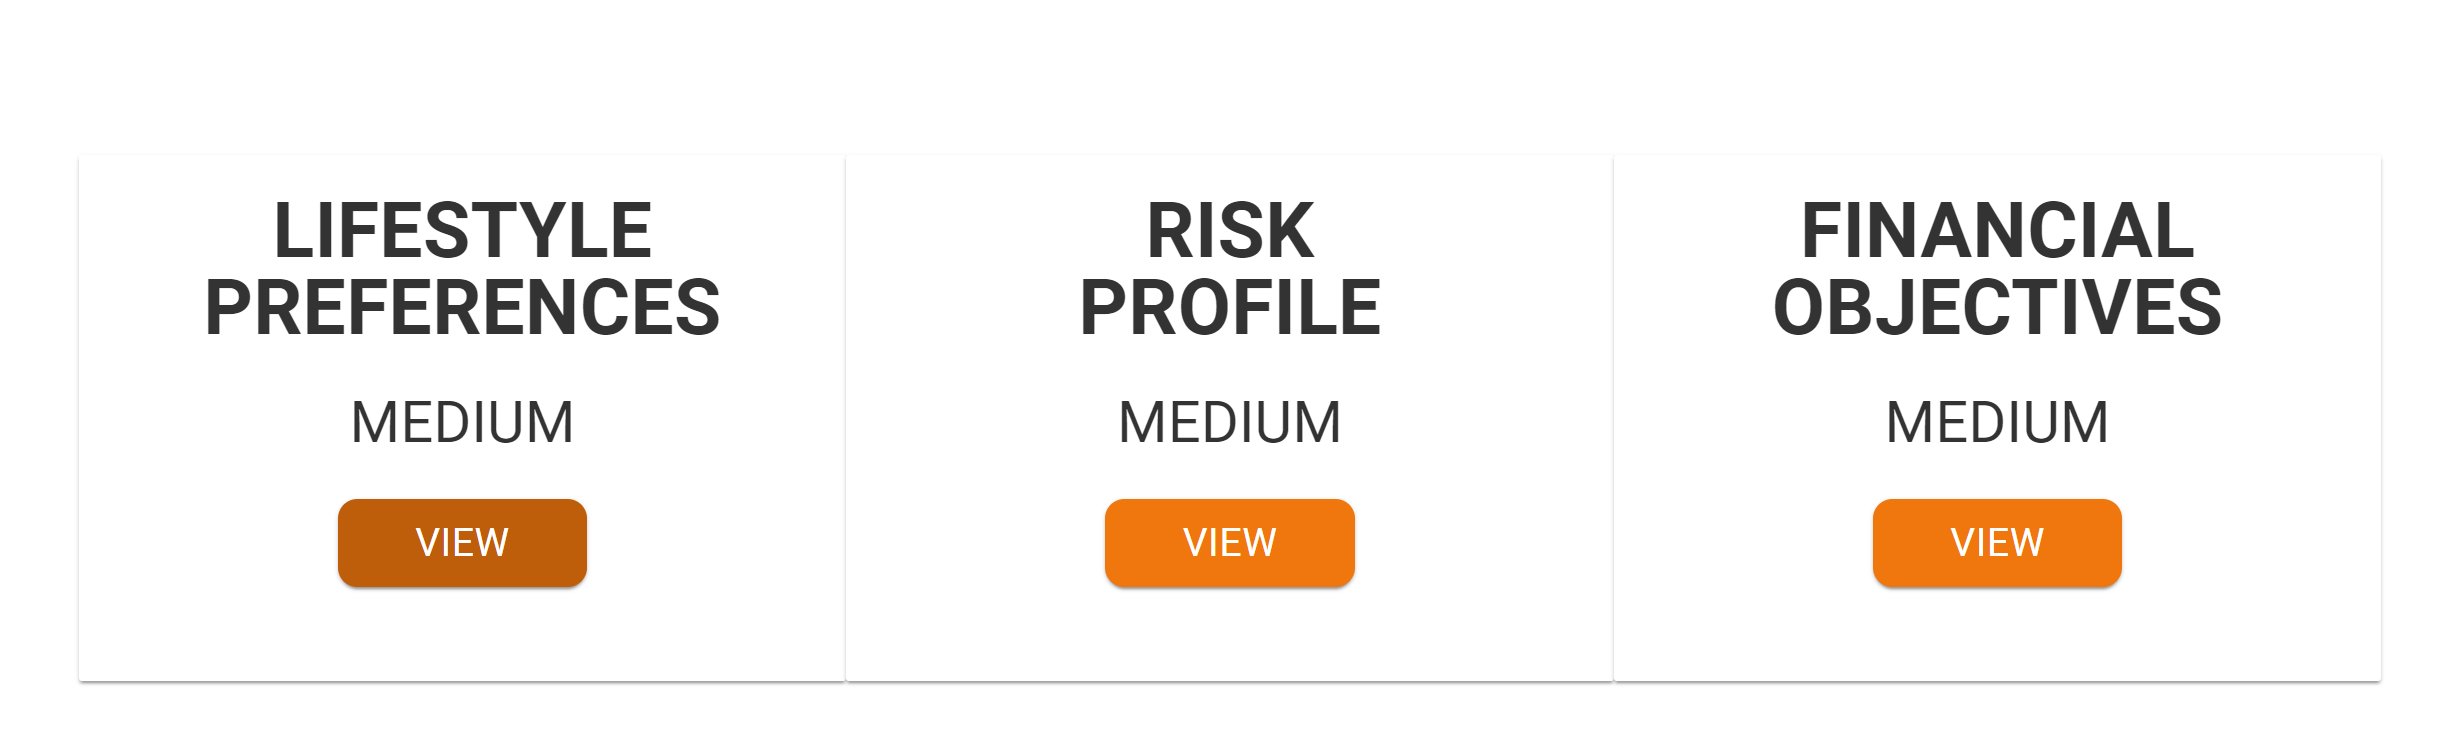 An image of the Money Profile screen with the three options of Lifestyle Preferences, Risk Profile, and Financial Objections.